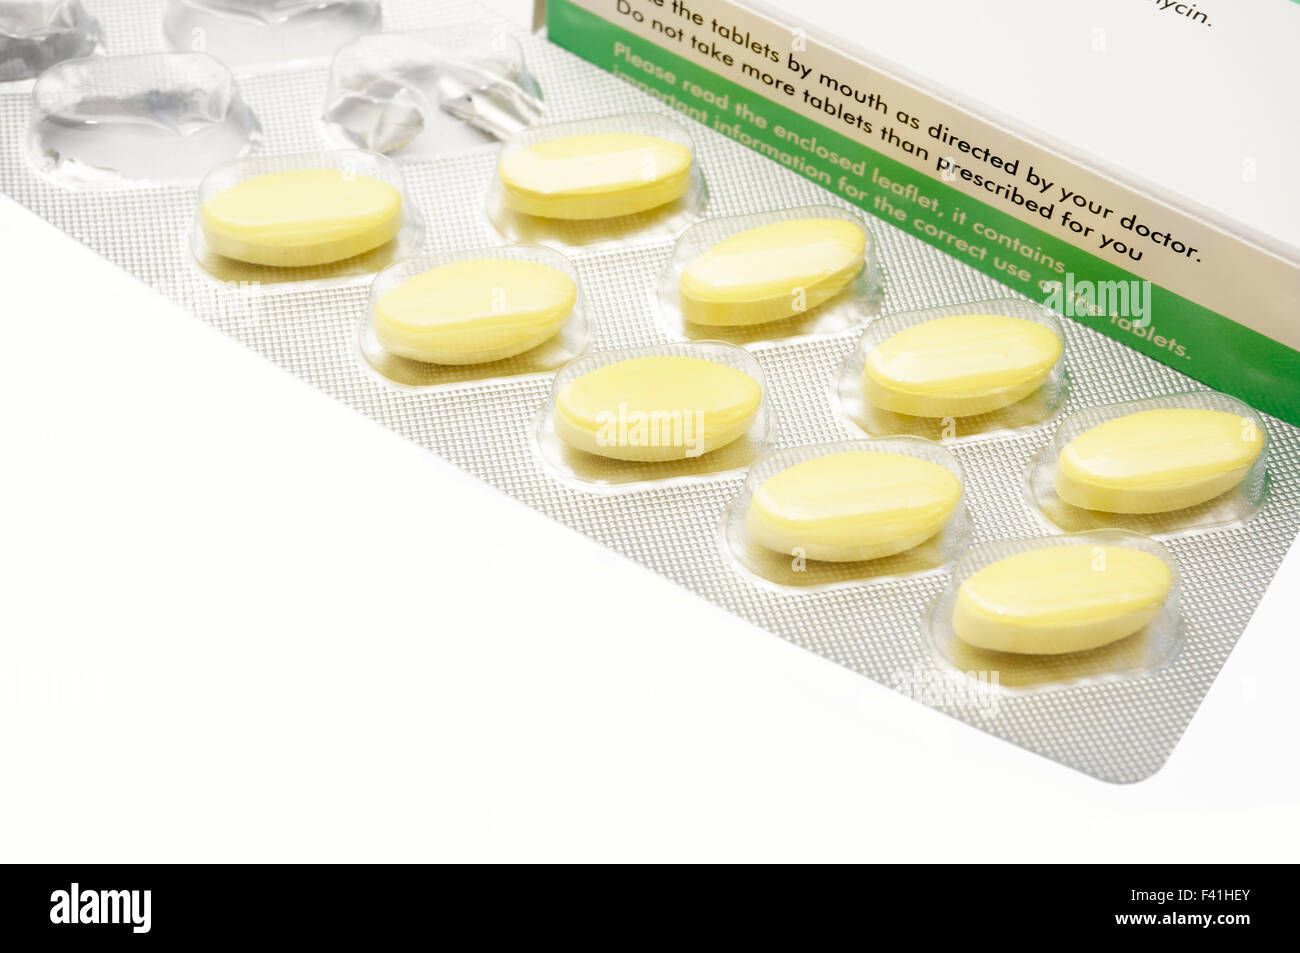 Clarithromycin tablets antibiotics belonging to a group of medicines known as macrolides Stock Photo